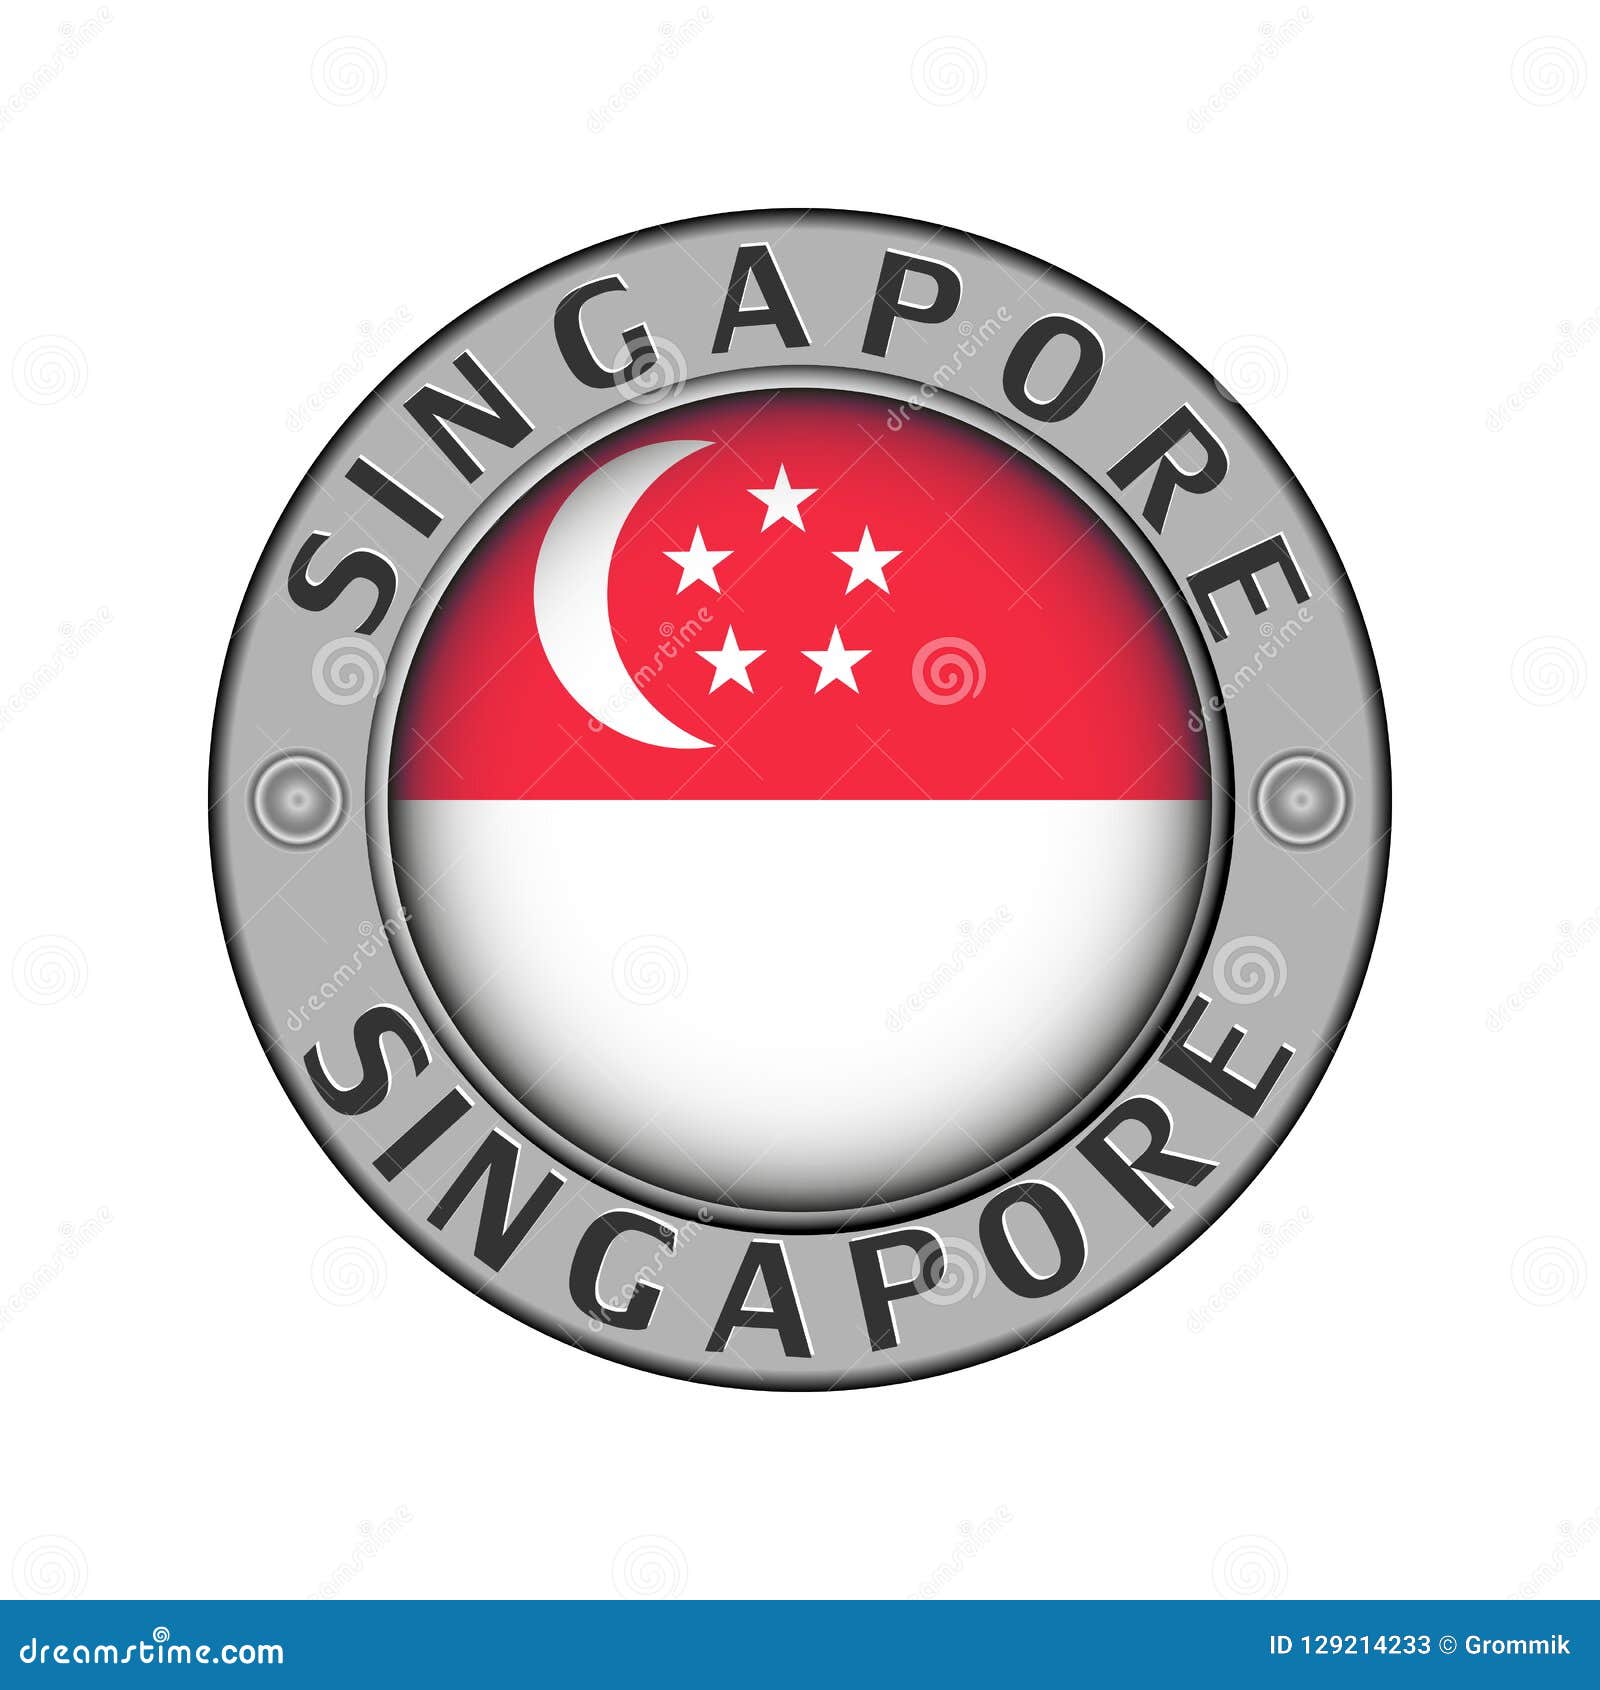 medallion-with-the-name-of-the-country-of-singapore-and-a-round-stock